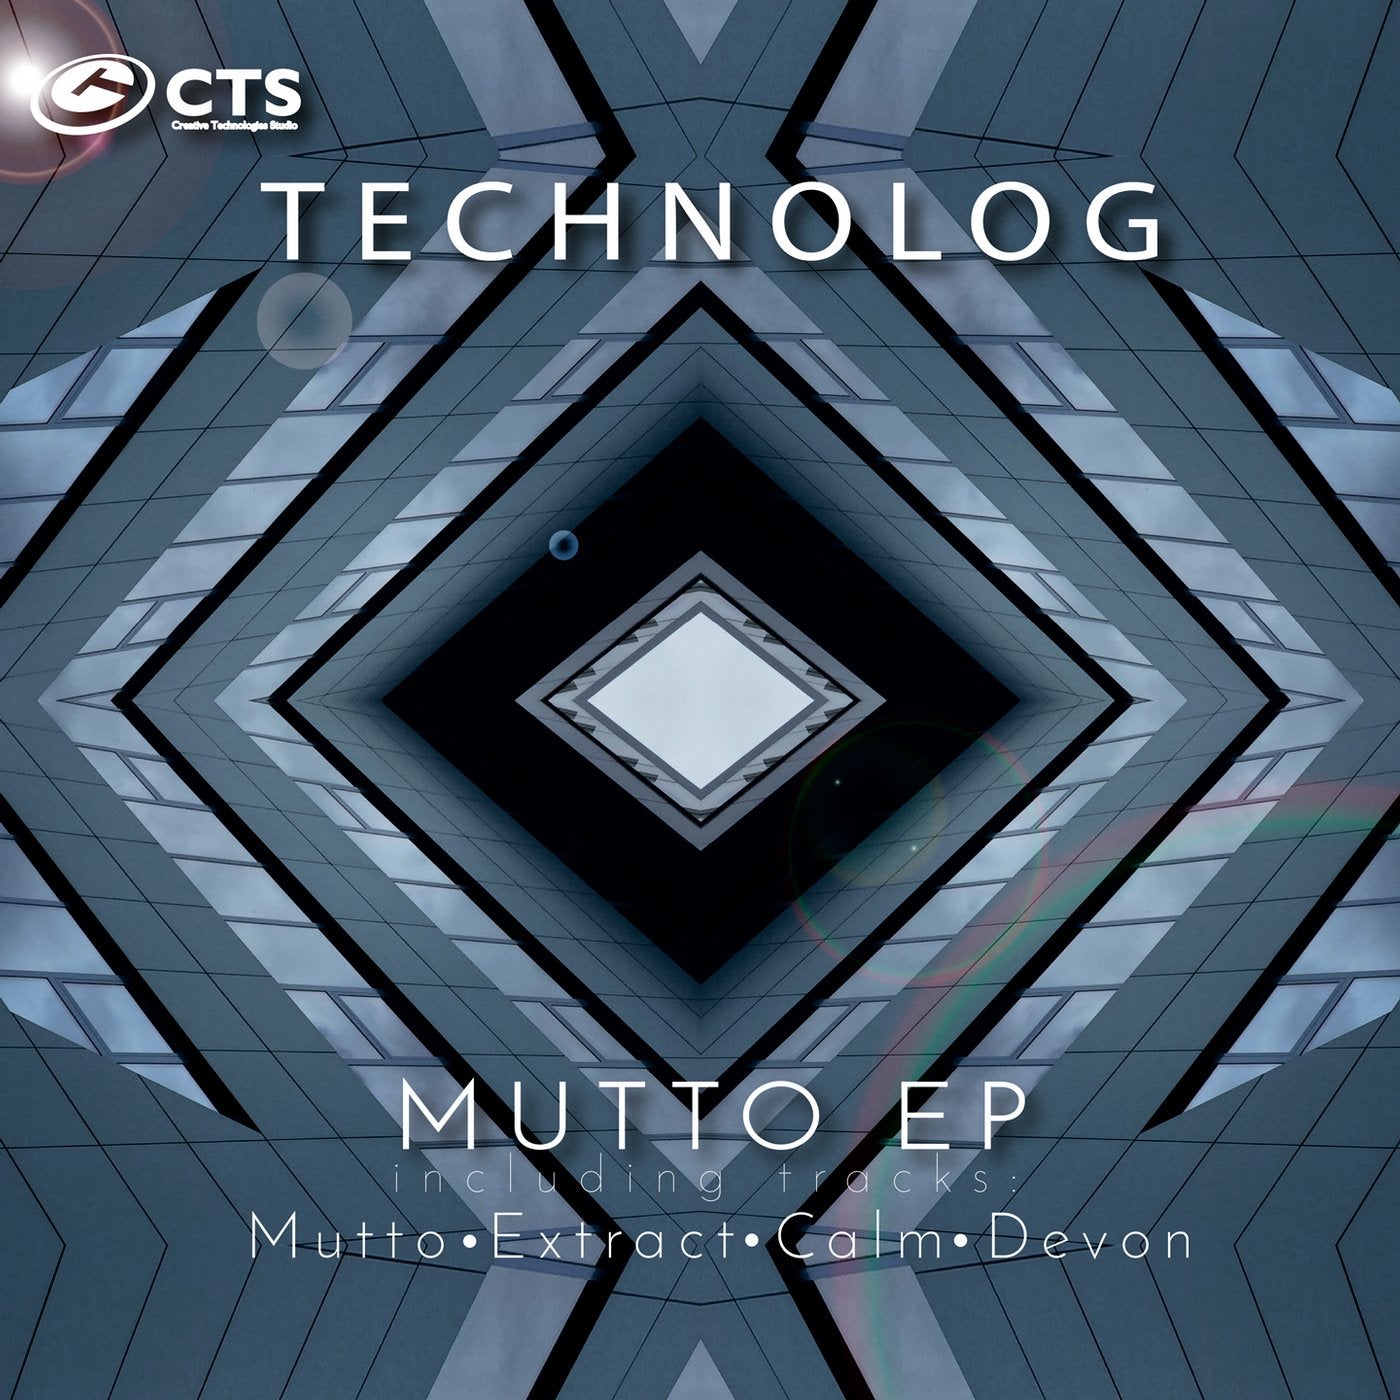 Mutto EP